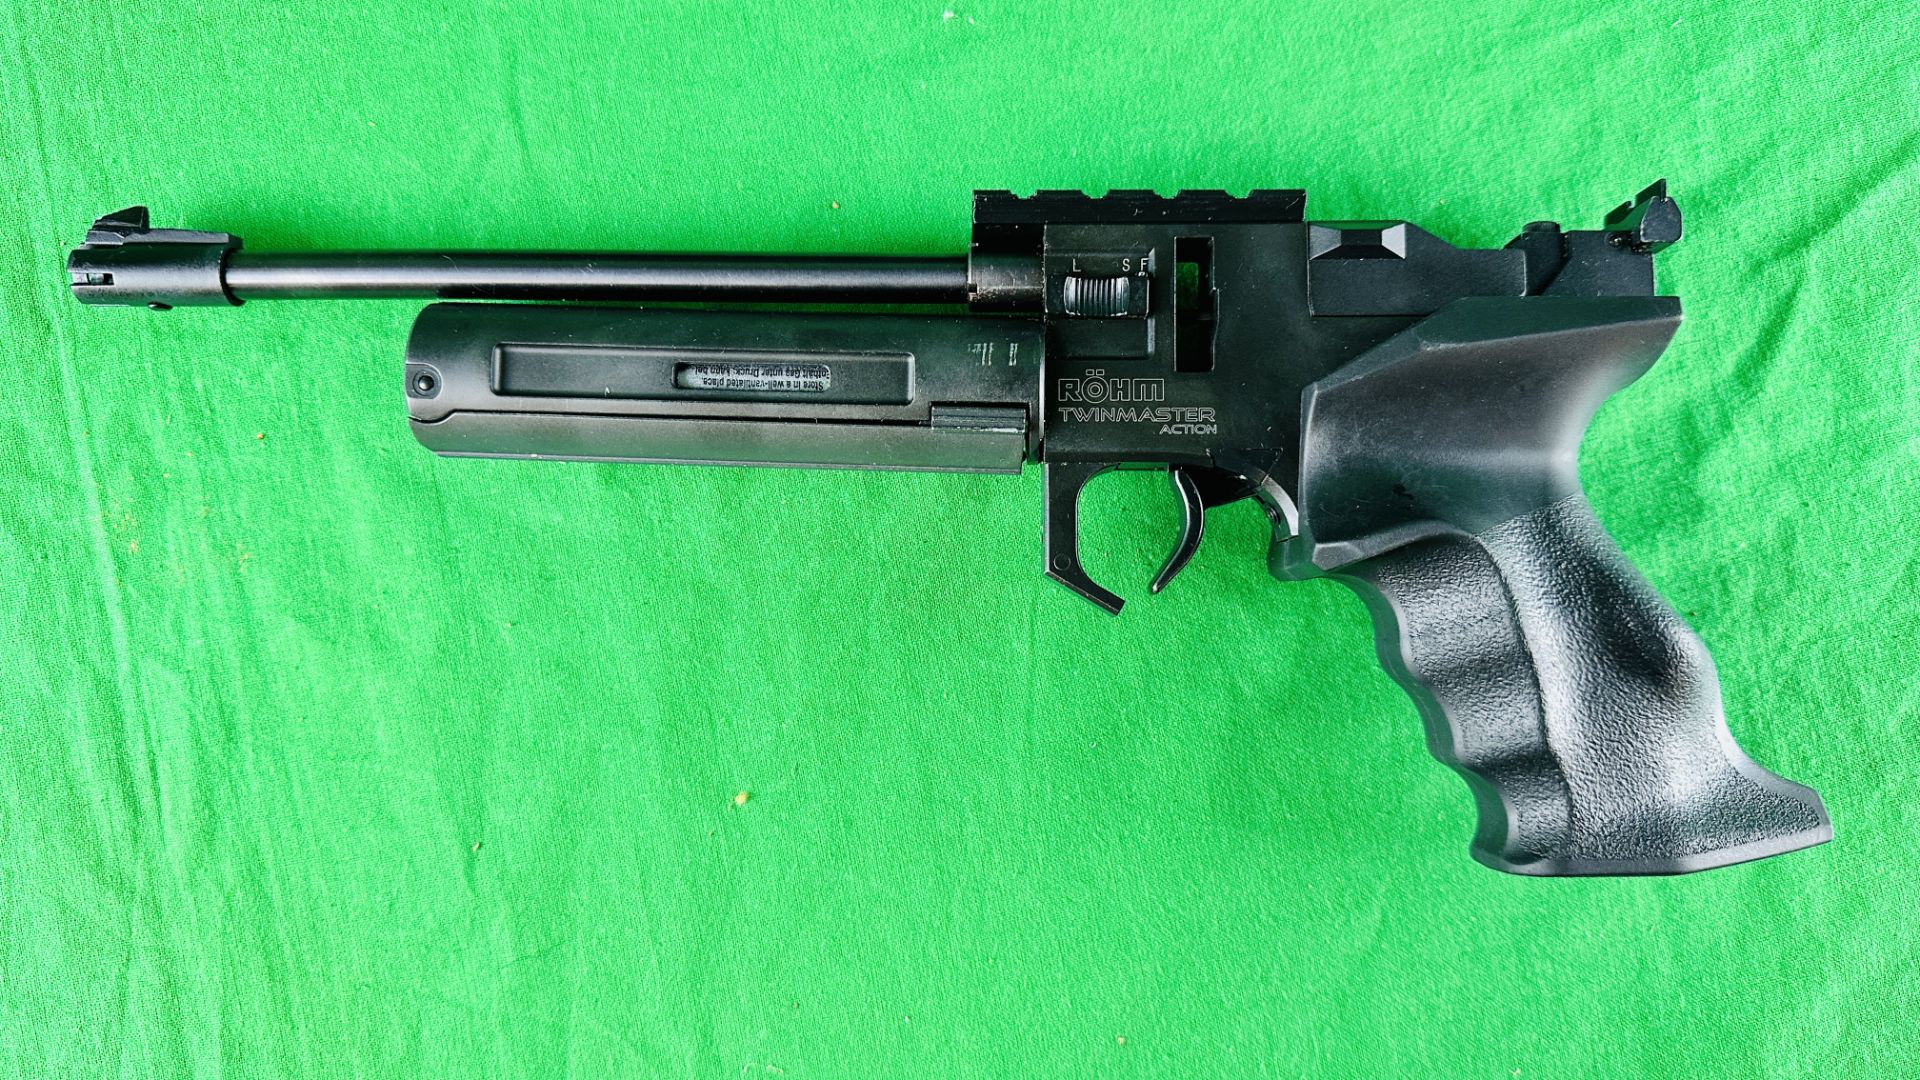 ROHM TWIN MASTER ACTION Co2 AIR PISTOL COMPLETE WITH ONE 8 SHOT MAGAZINE AND A ROHM SILENCER IN - Image 5 of 11